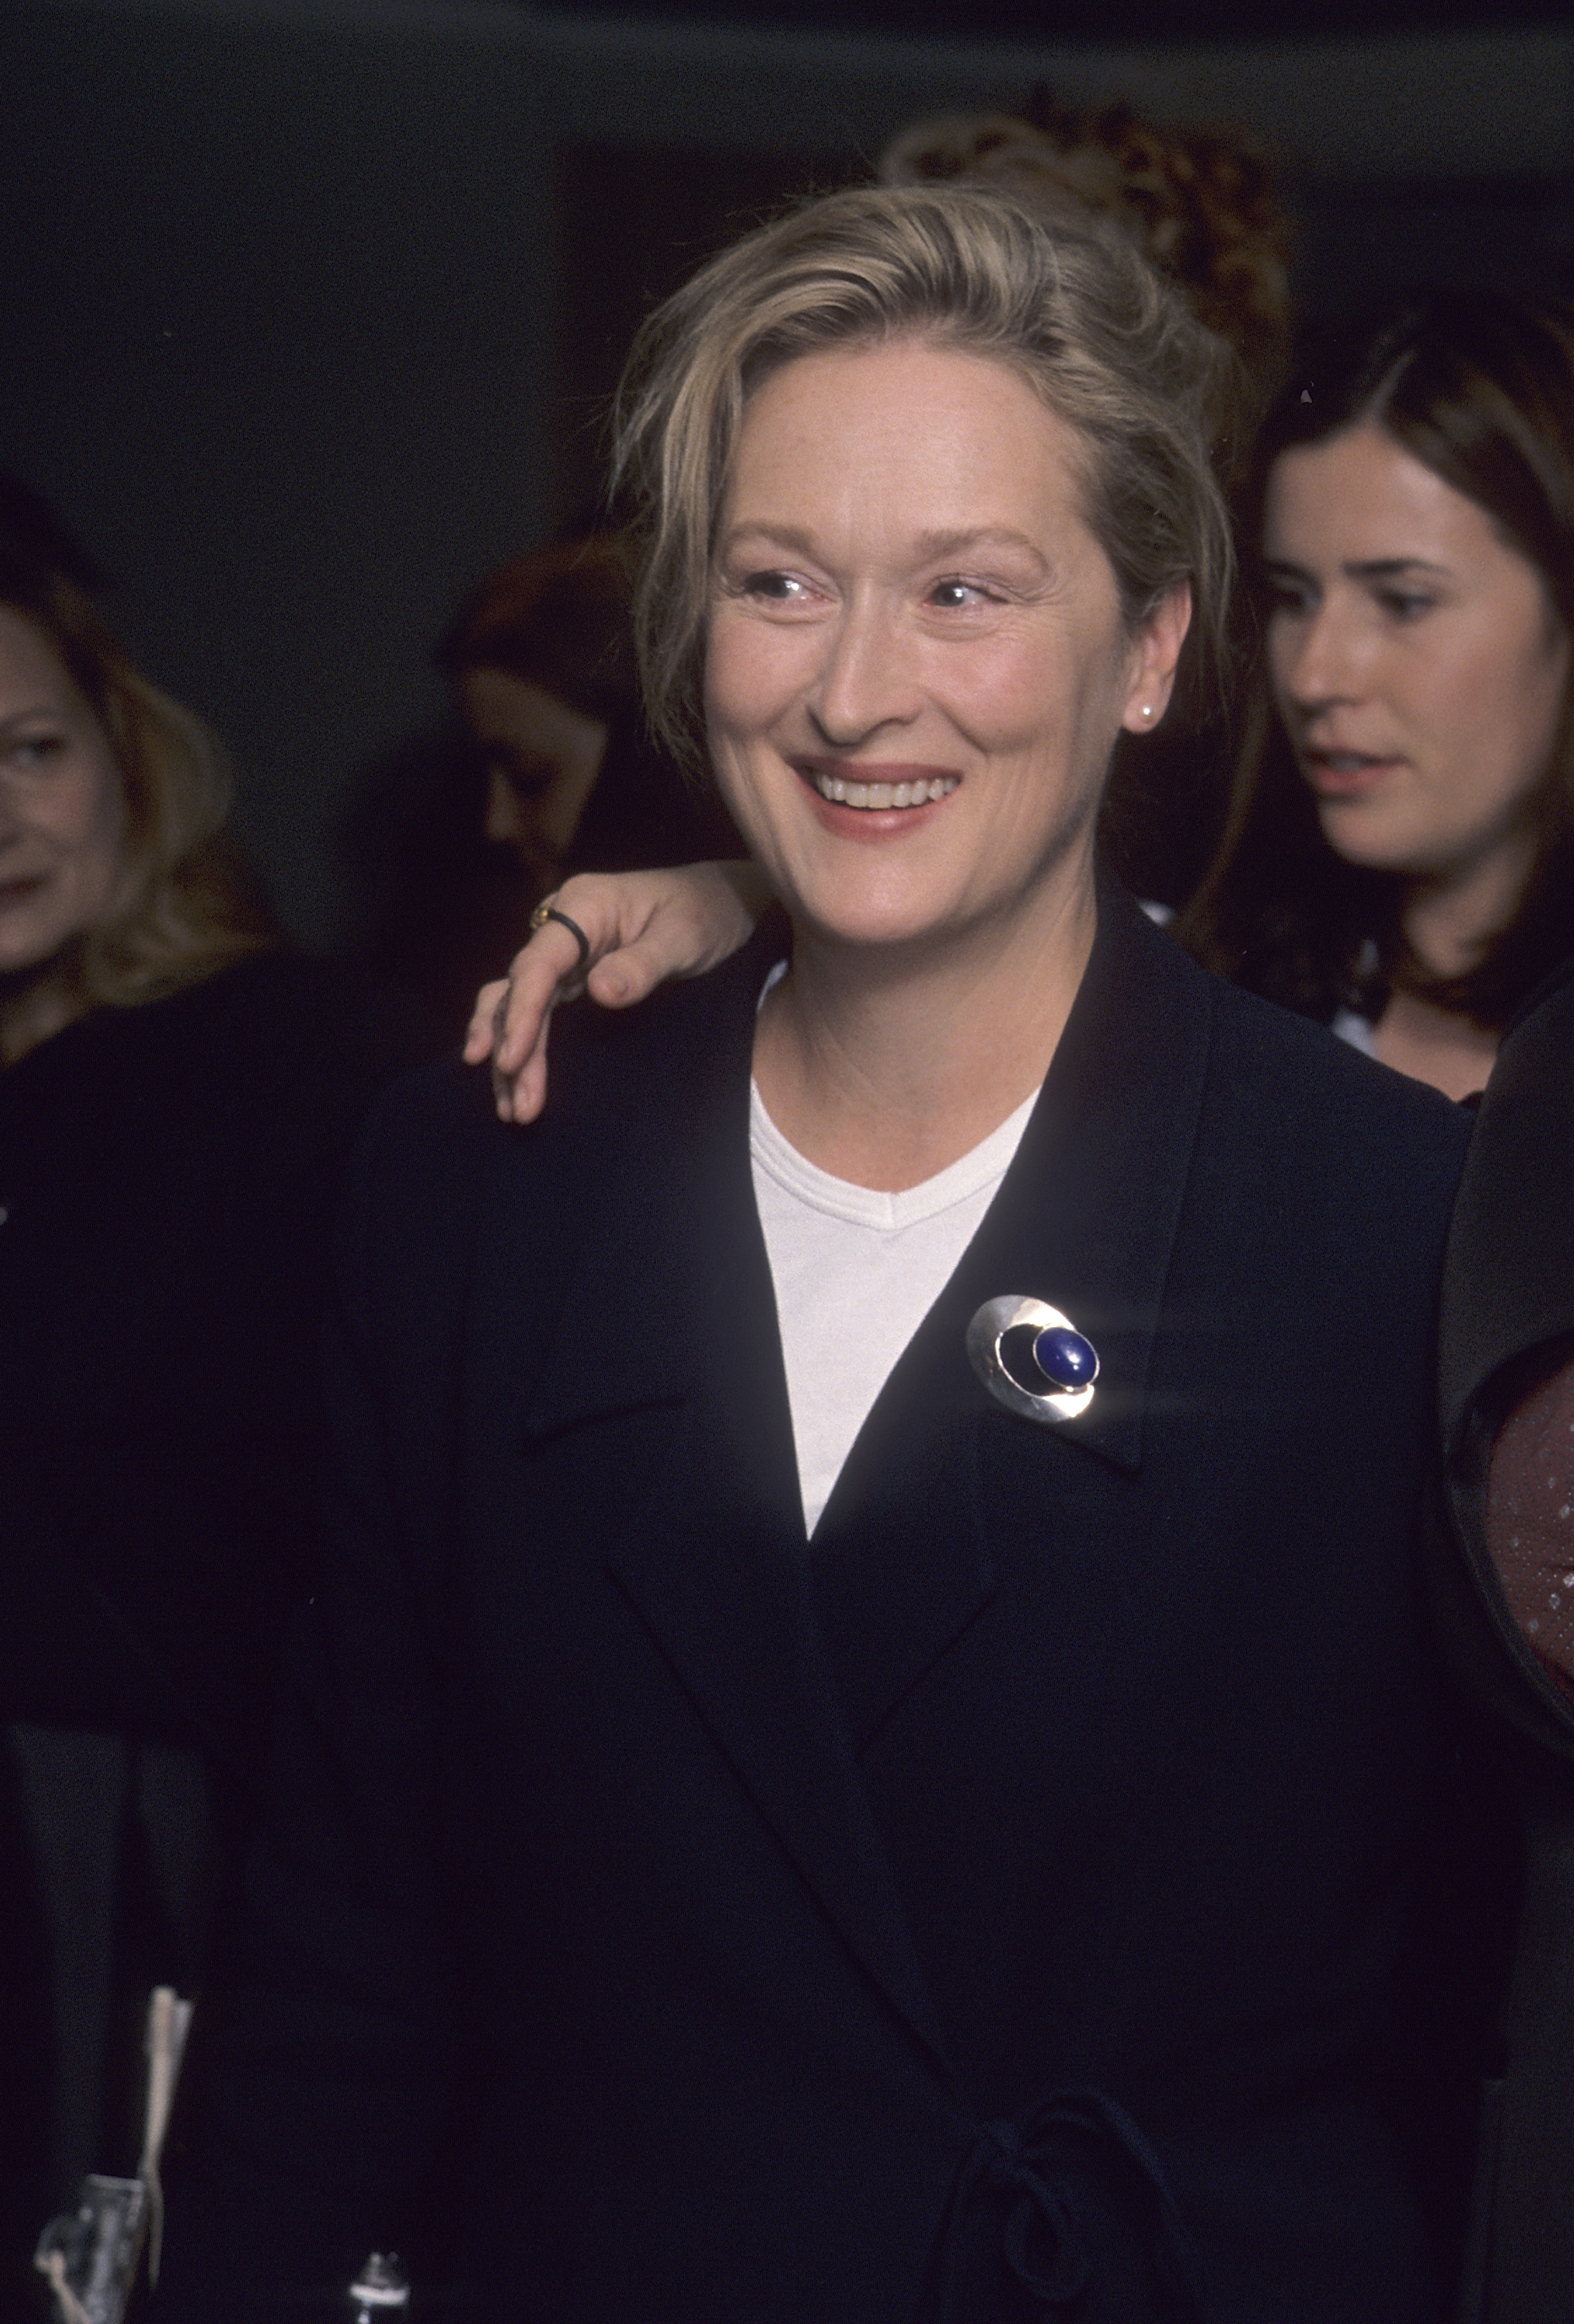 Meryl Streep in a black blazer with a round pin, smiling at an event